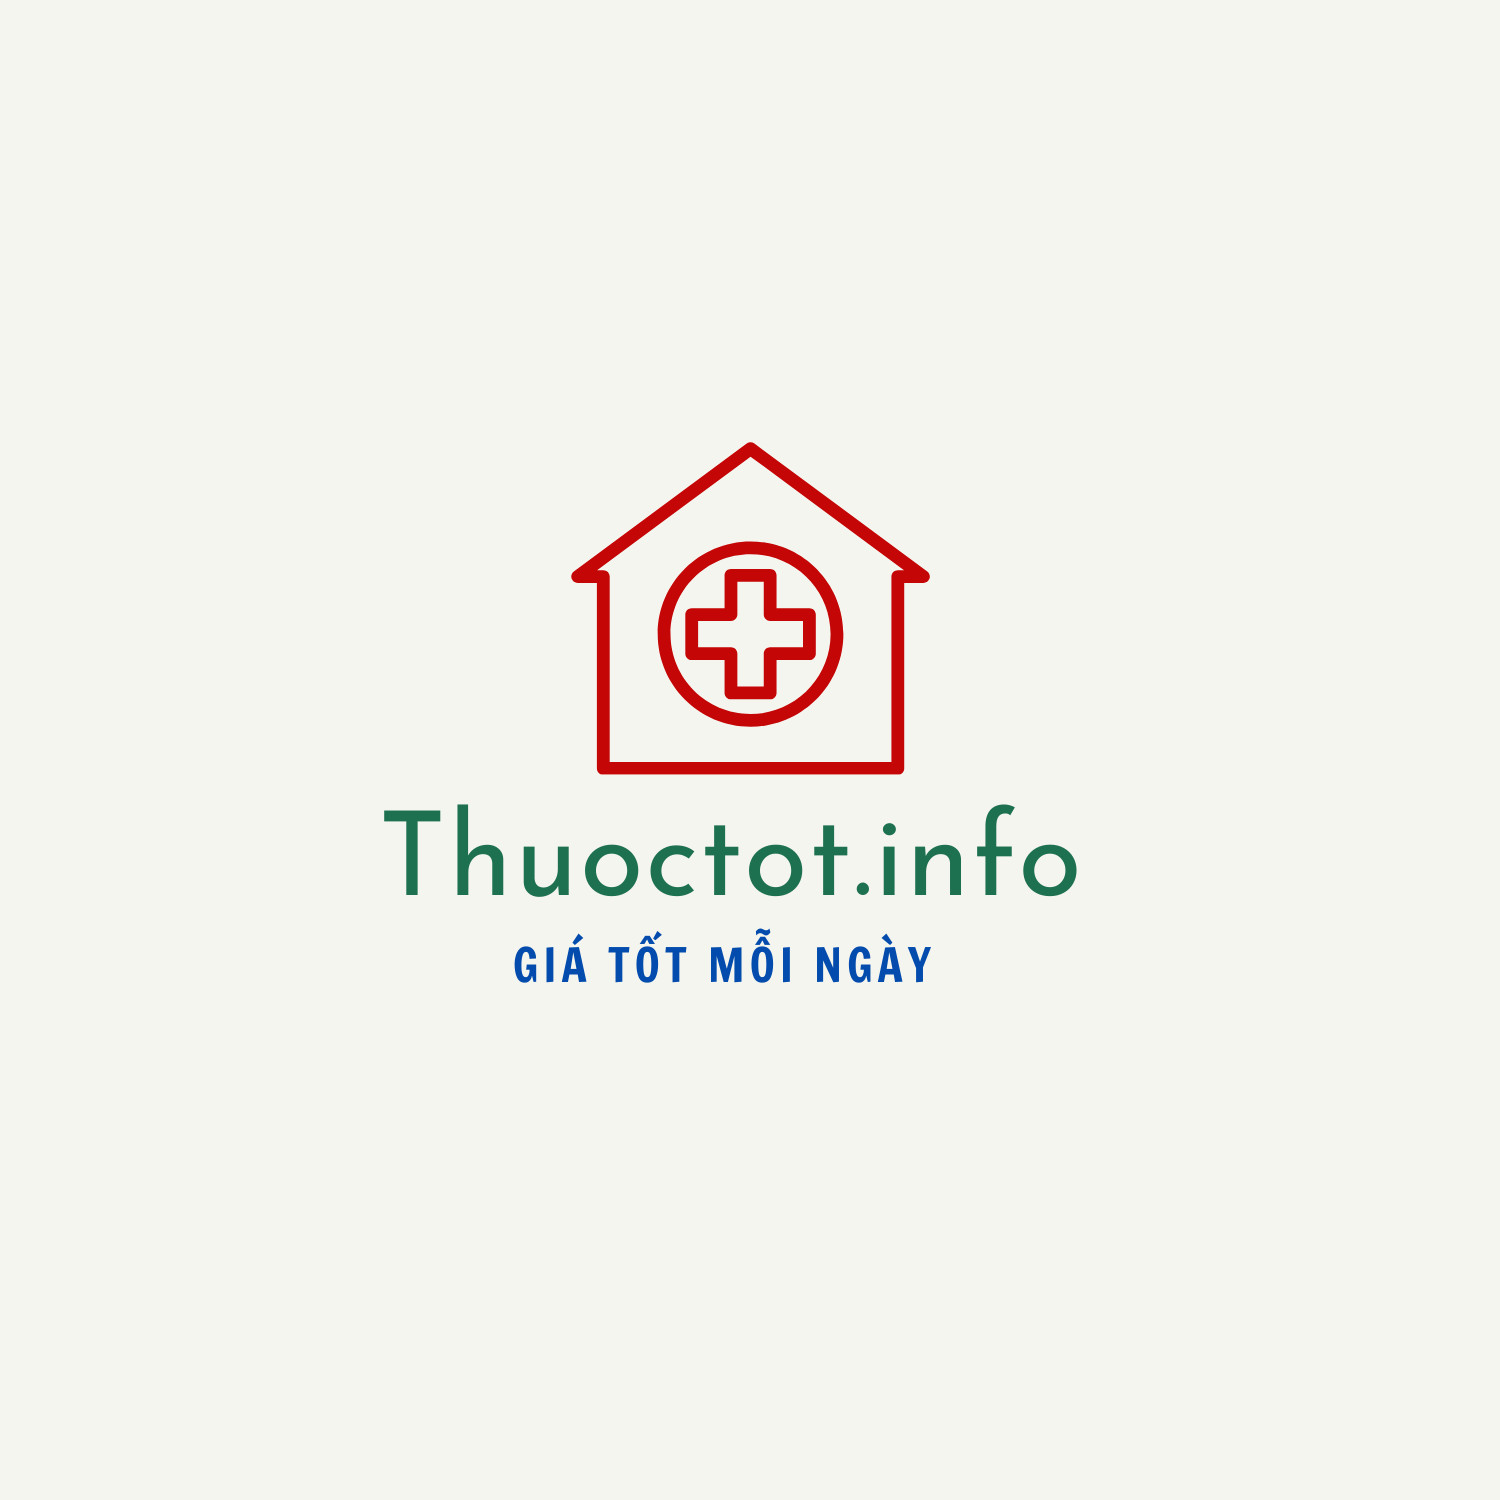 Thuoctot.info